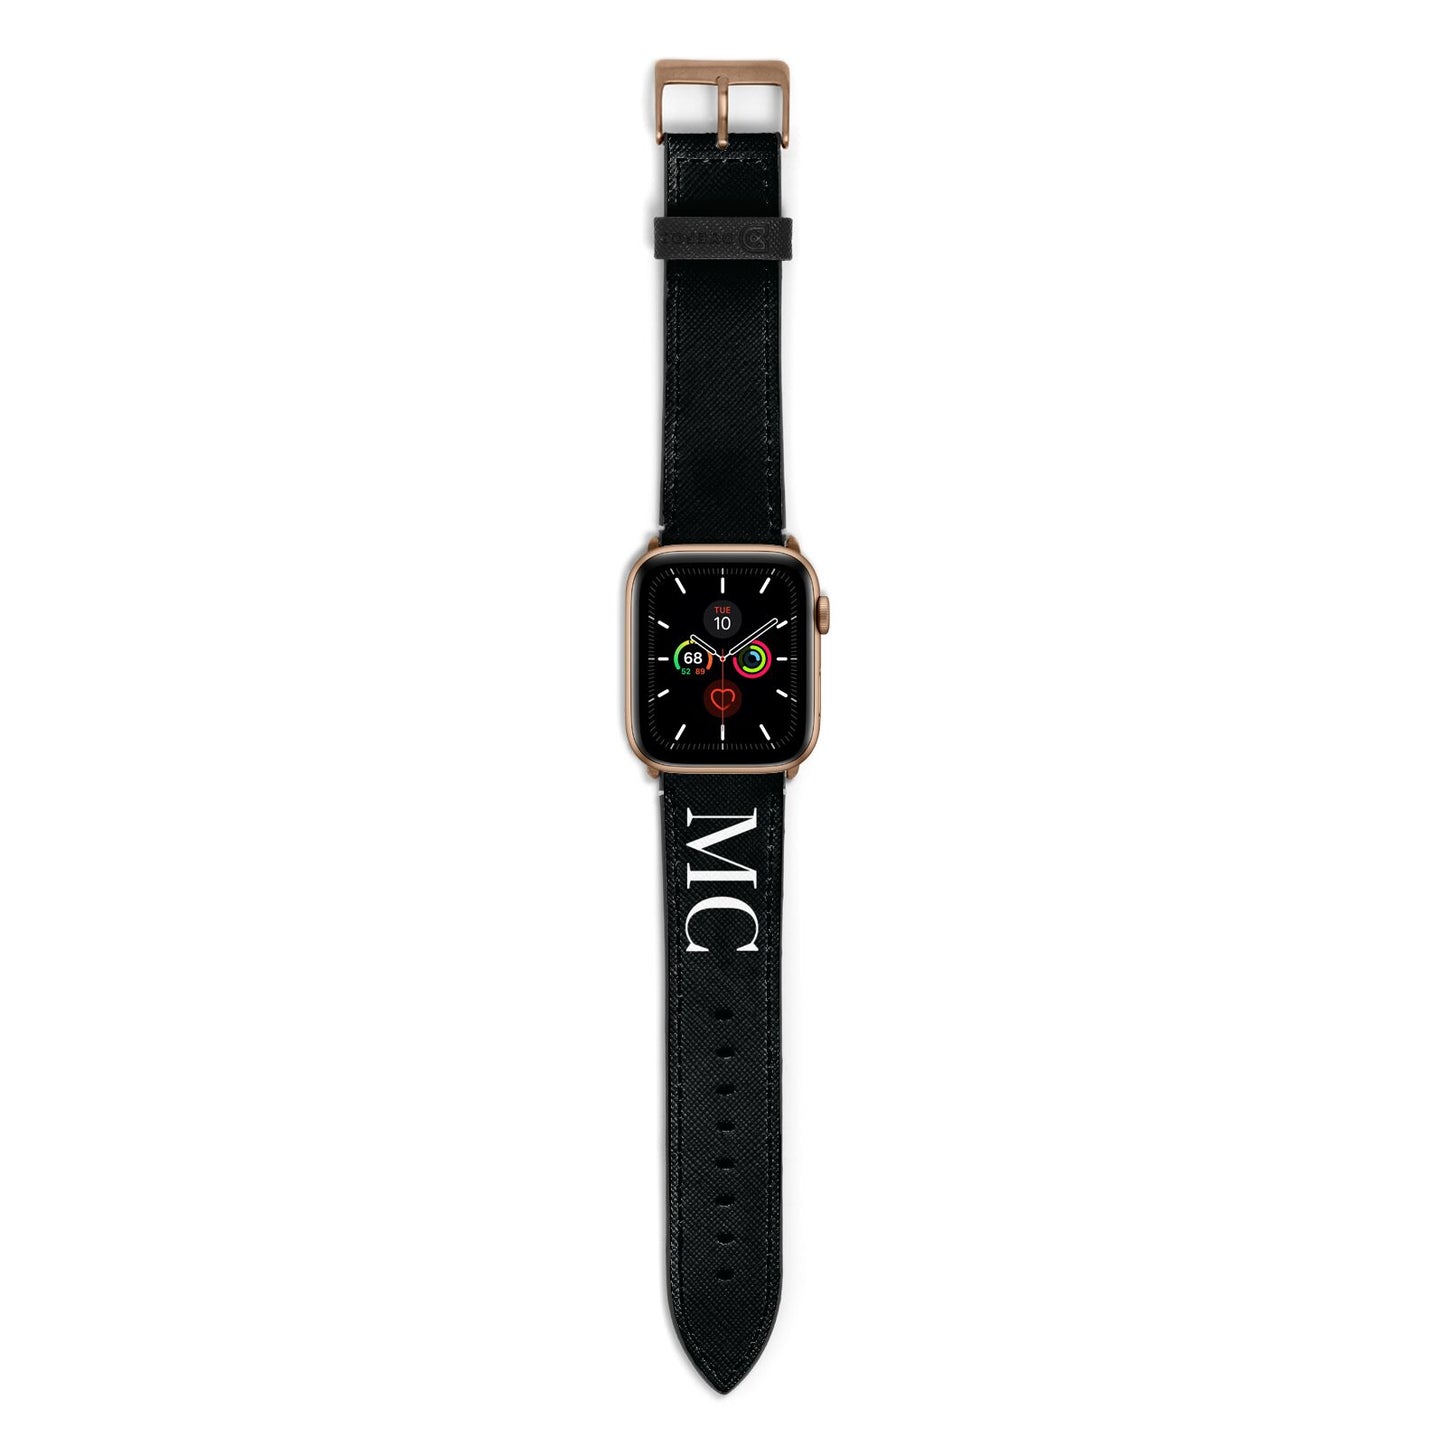 Initials Personalised 1 Apple Watch Strap with Gold Hardware